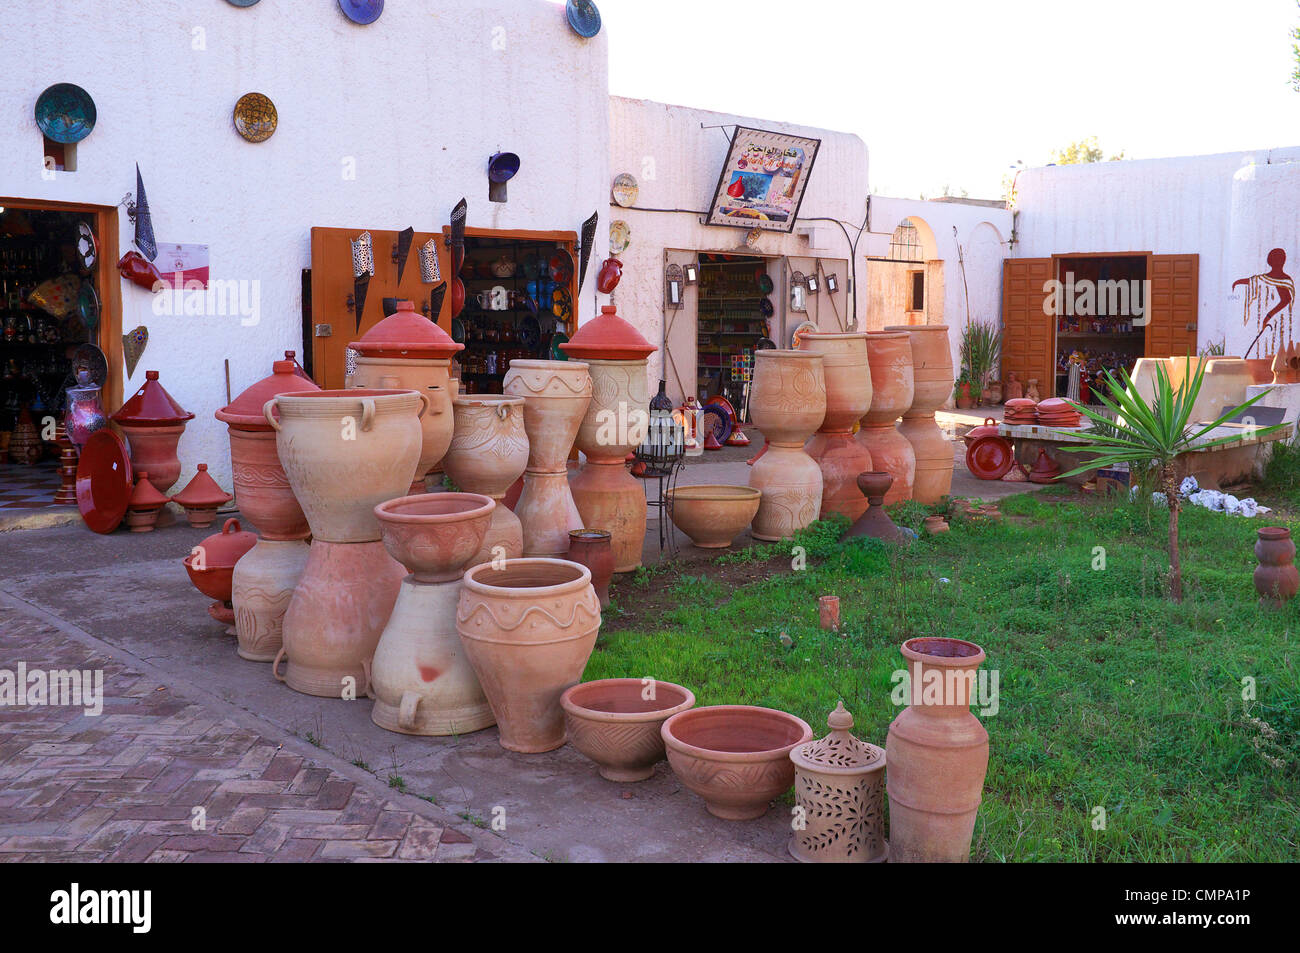 Rabat one of the shops in the craft village, Morocco, Africa Stock Photo